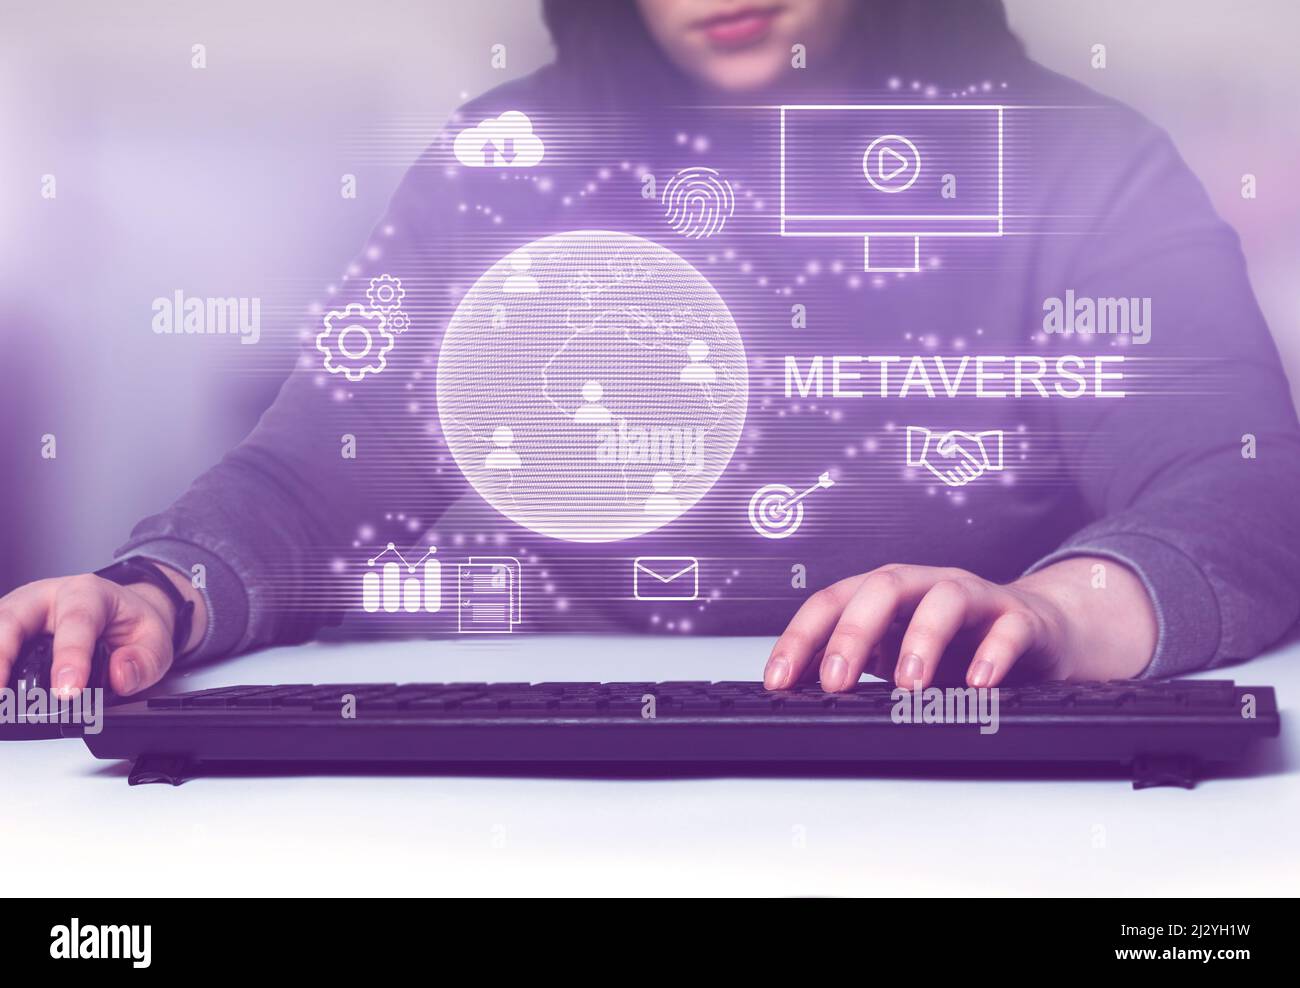 Woman interacting with virtual interface connection metaverse. Technology and digital marketing. Stock Photo